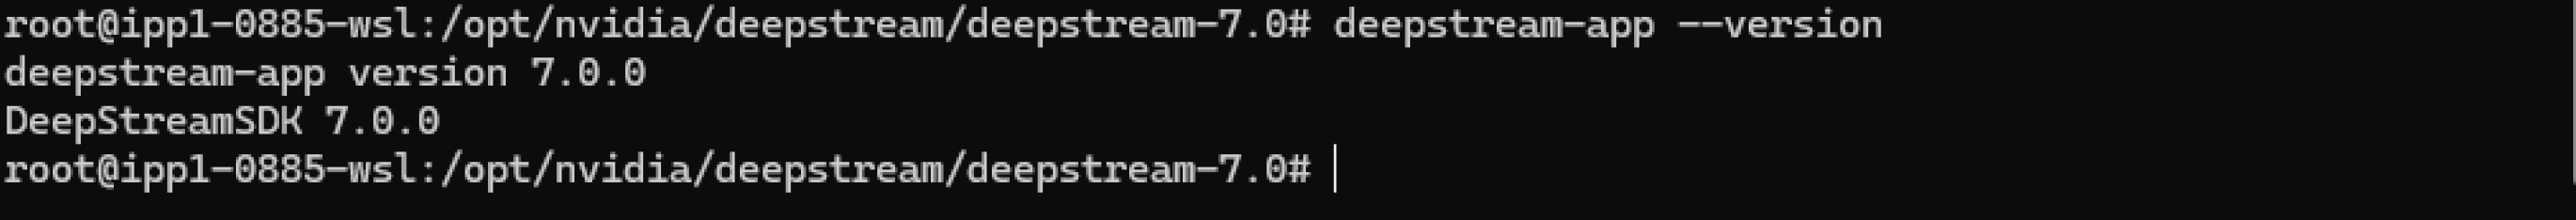 Expected output of deepstream-app --version command